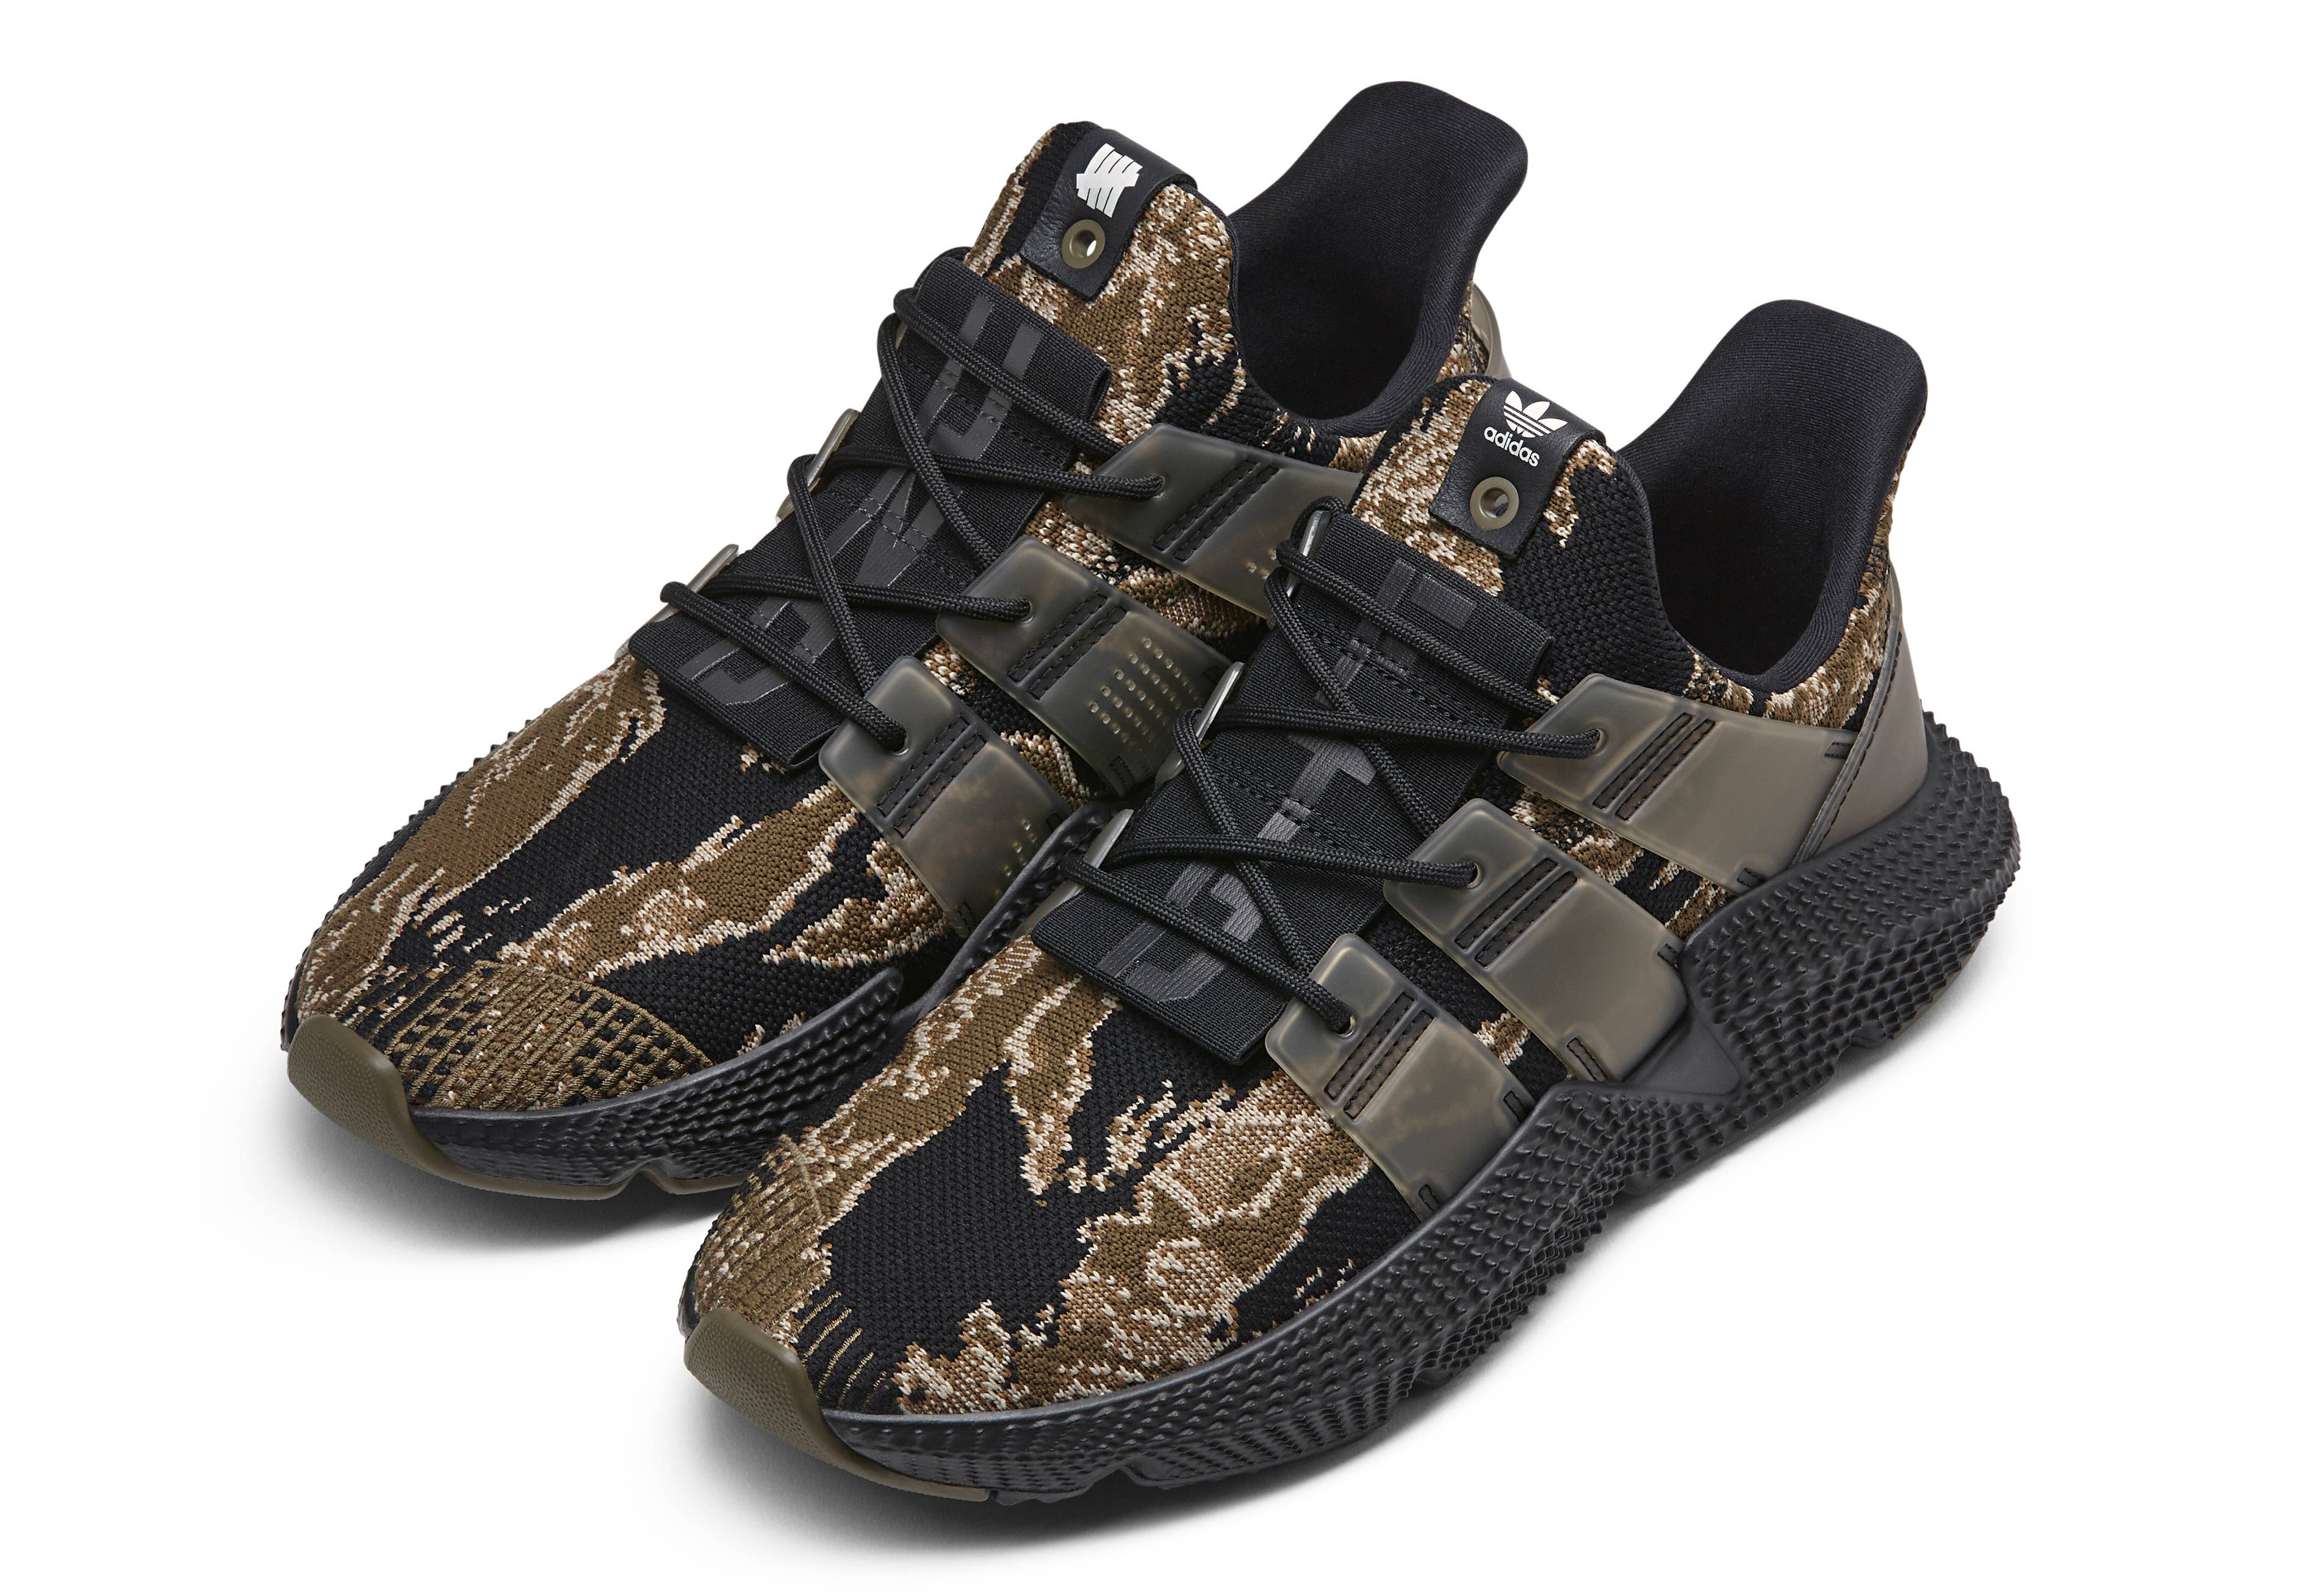 Londres pista Precursor The Adidas Prophere Gets Its First Collab | Complex